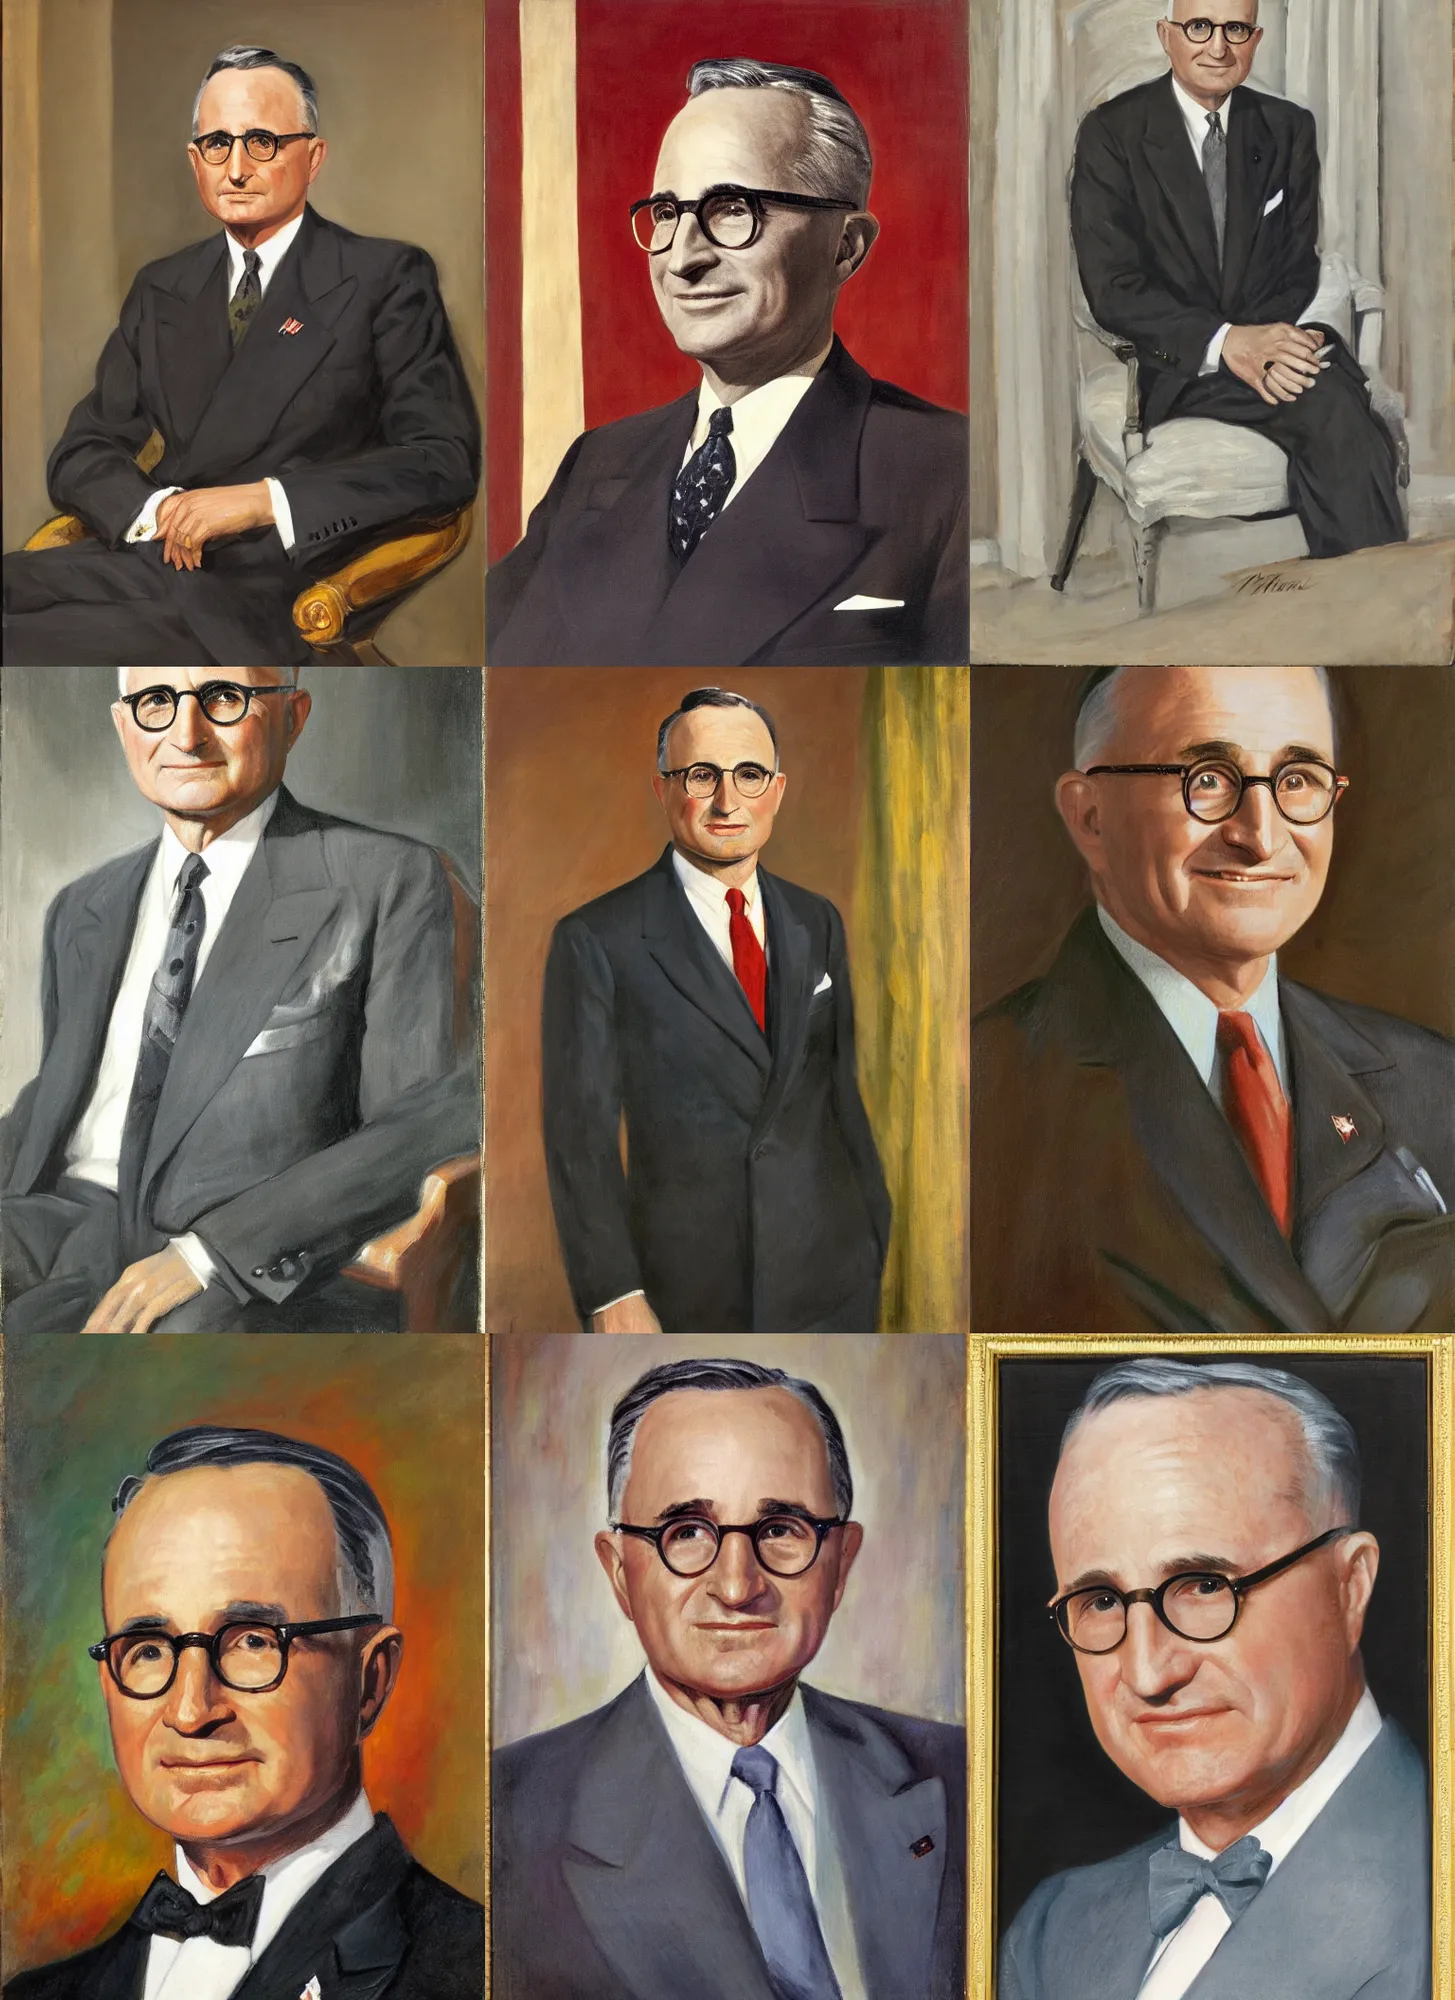 Prompt: Harry S. Truman, 33rd President of the United States, 1945-1953. Portrait by Martha Greta Kempton in 1947. Oil on canvas, 50 x 40 1/4 inches. White House Collection/White House Historical Association